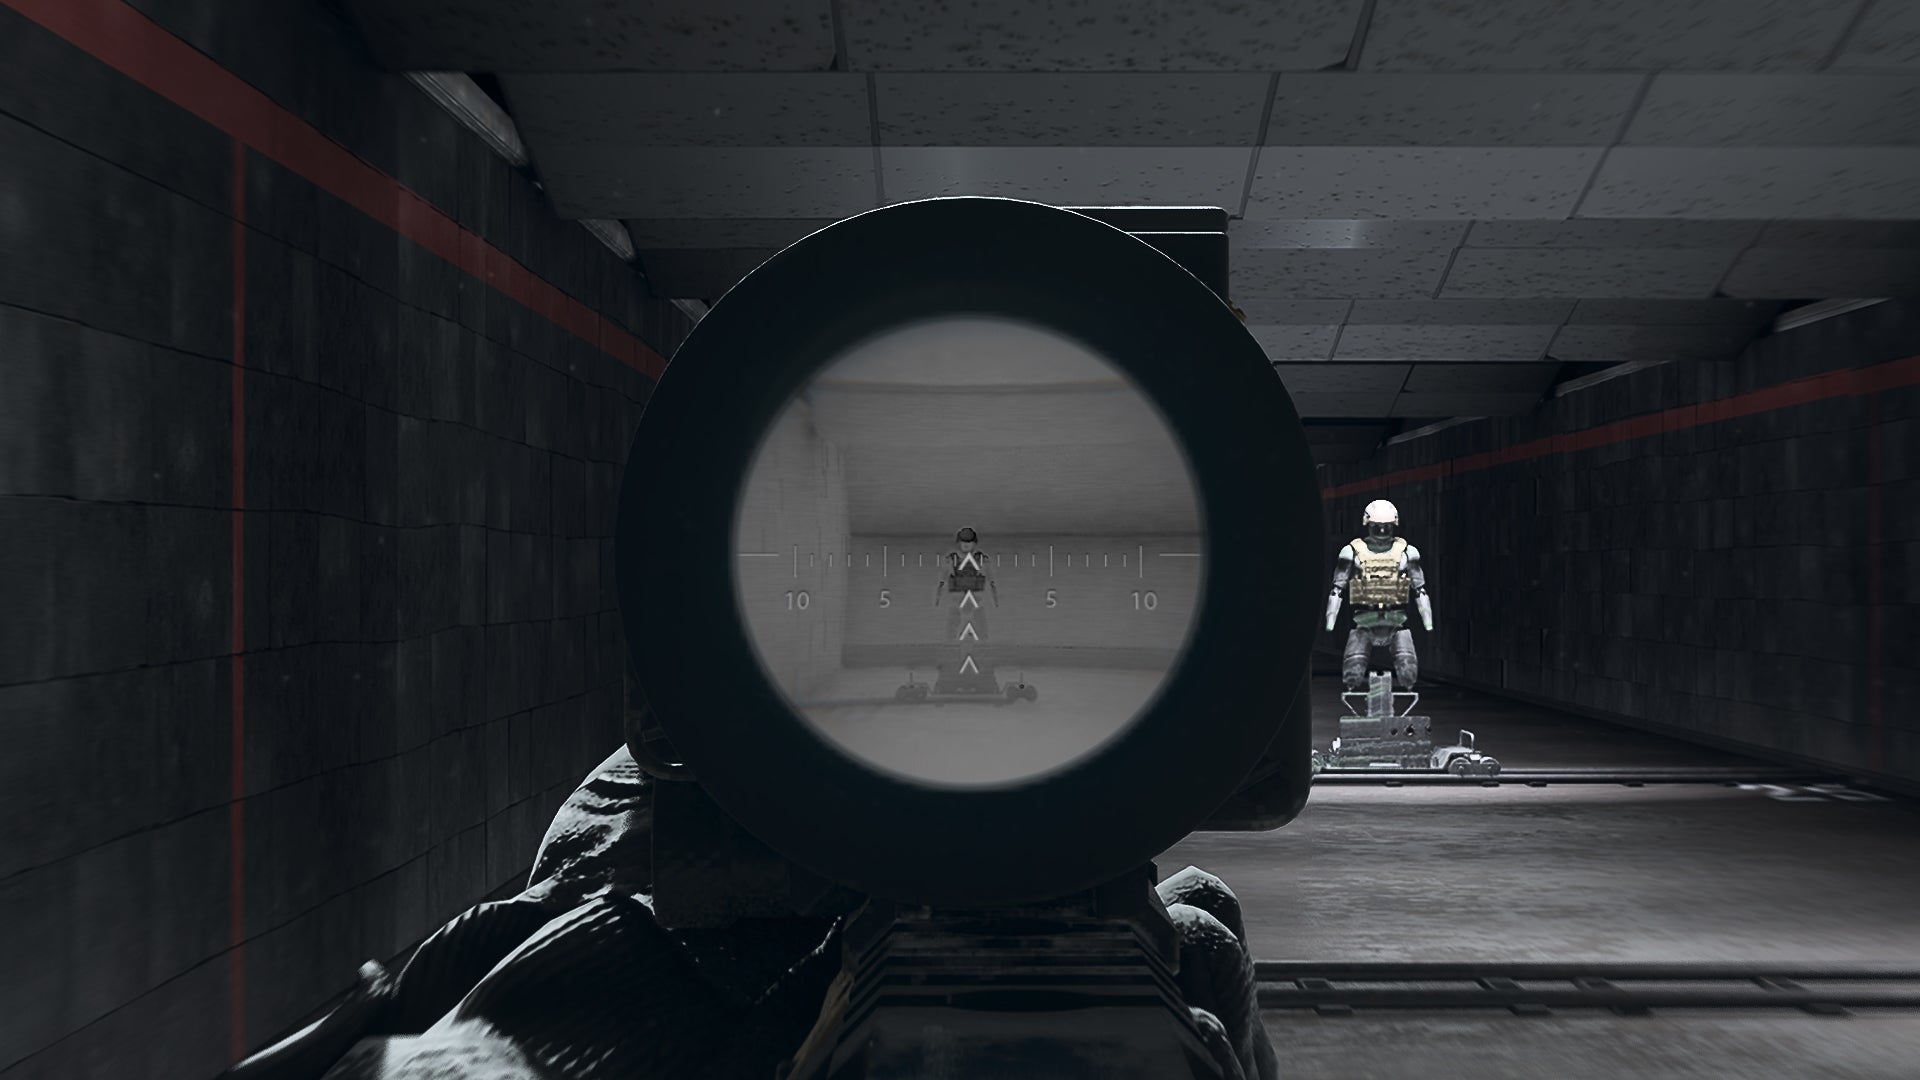 The player in Warzone 2.0 aims at a training dummy using the VX350 Thermal Optic optic attachment.